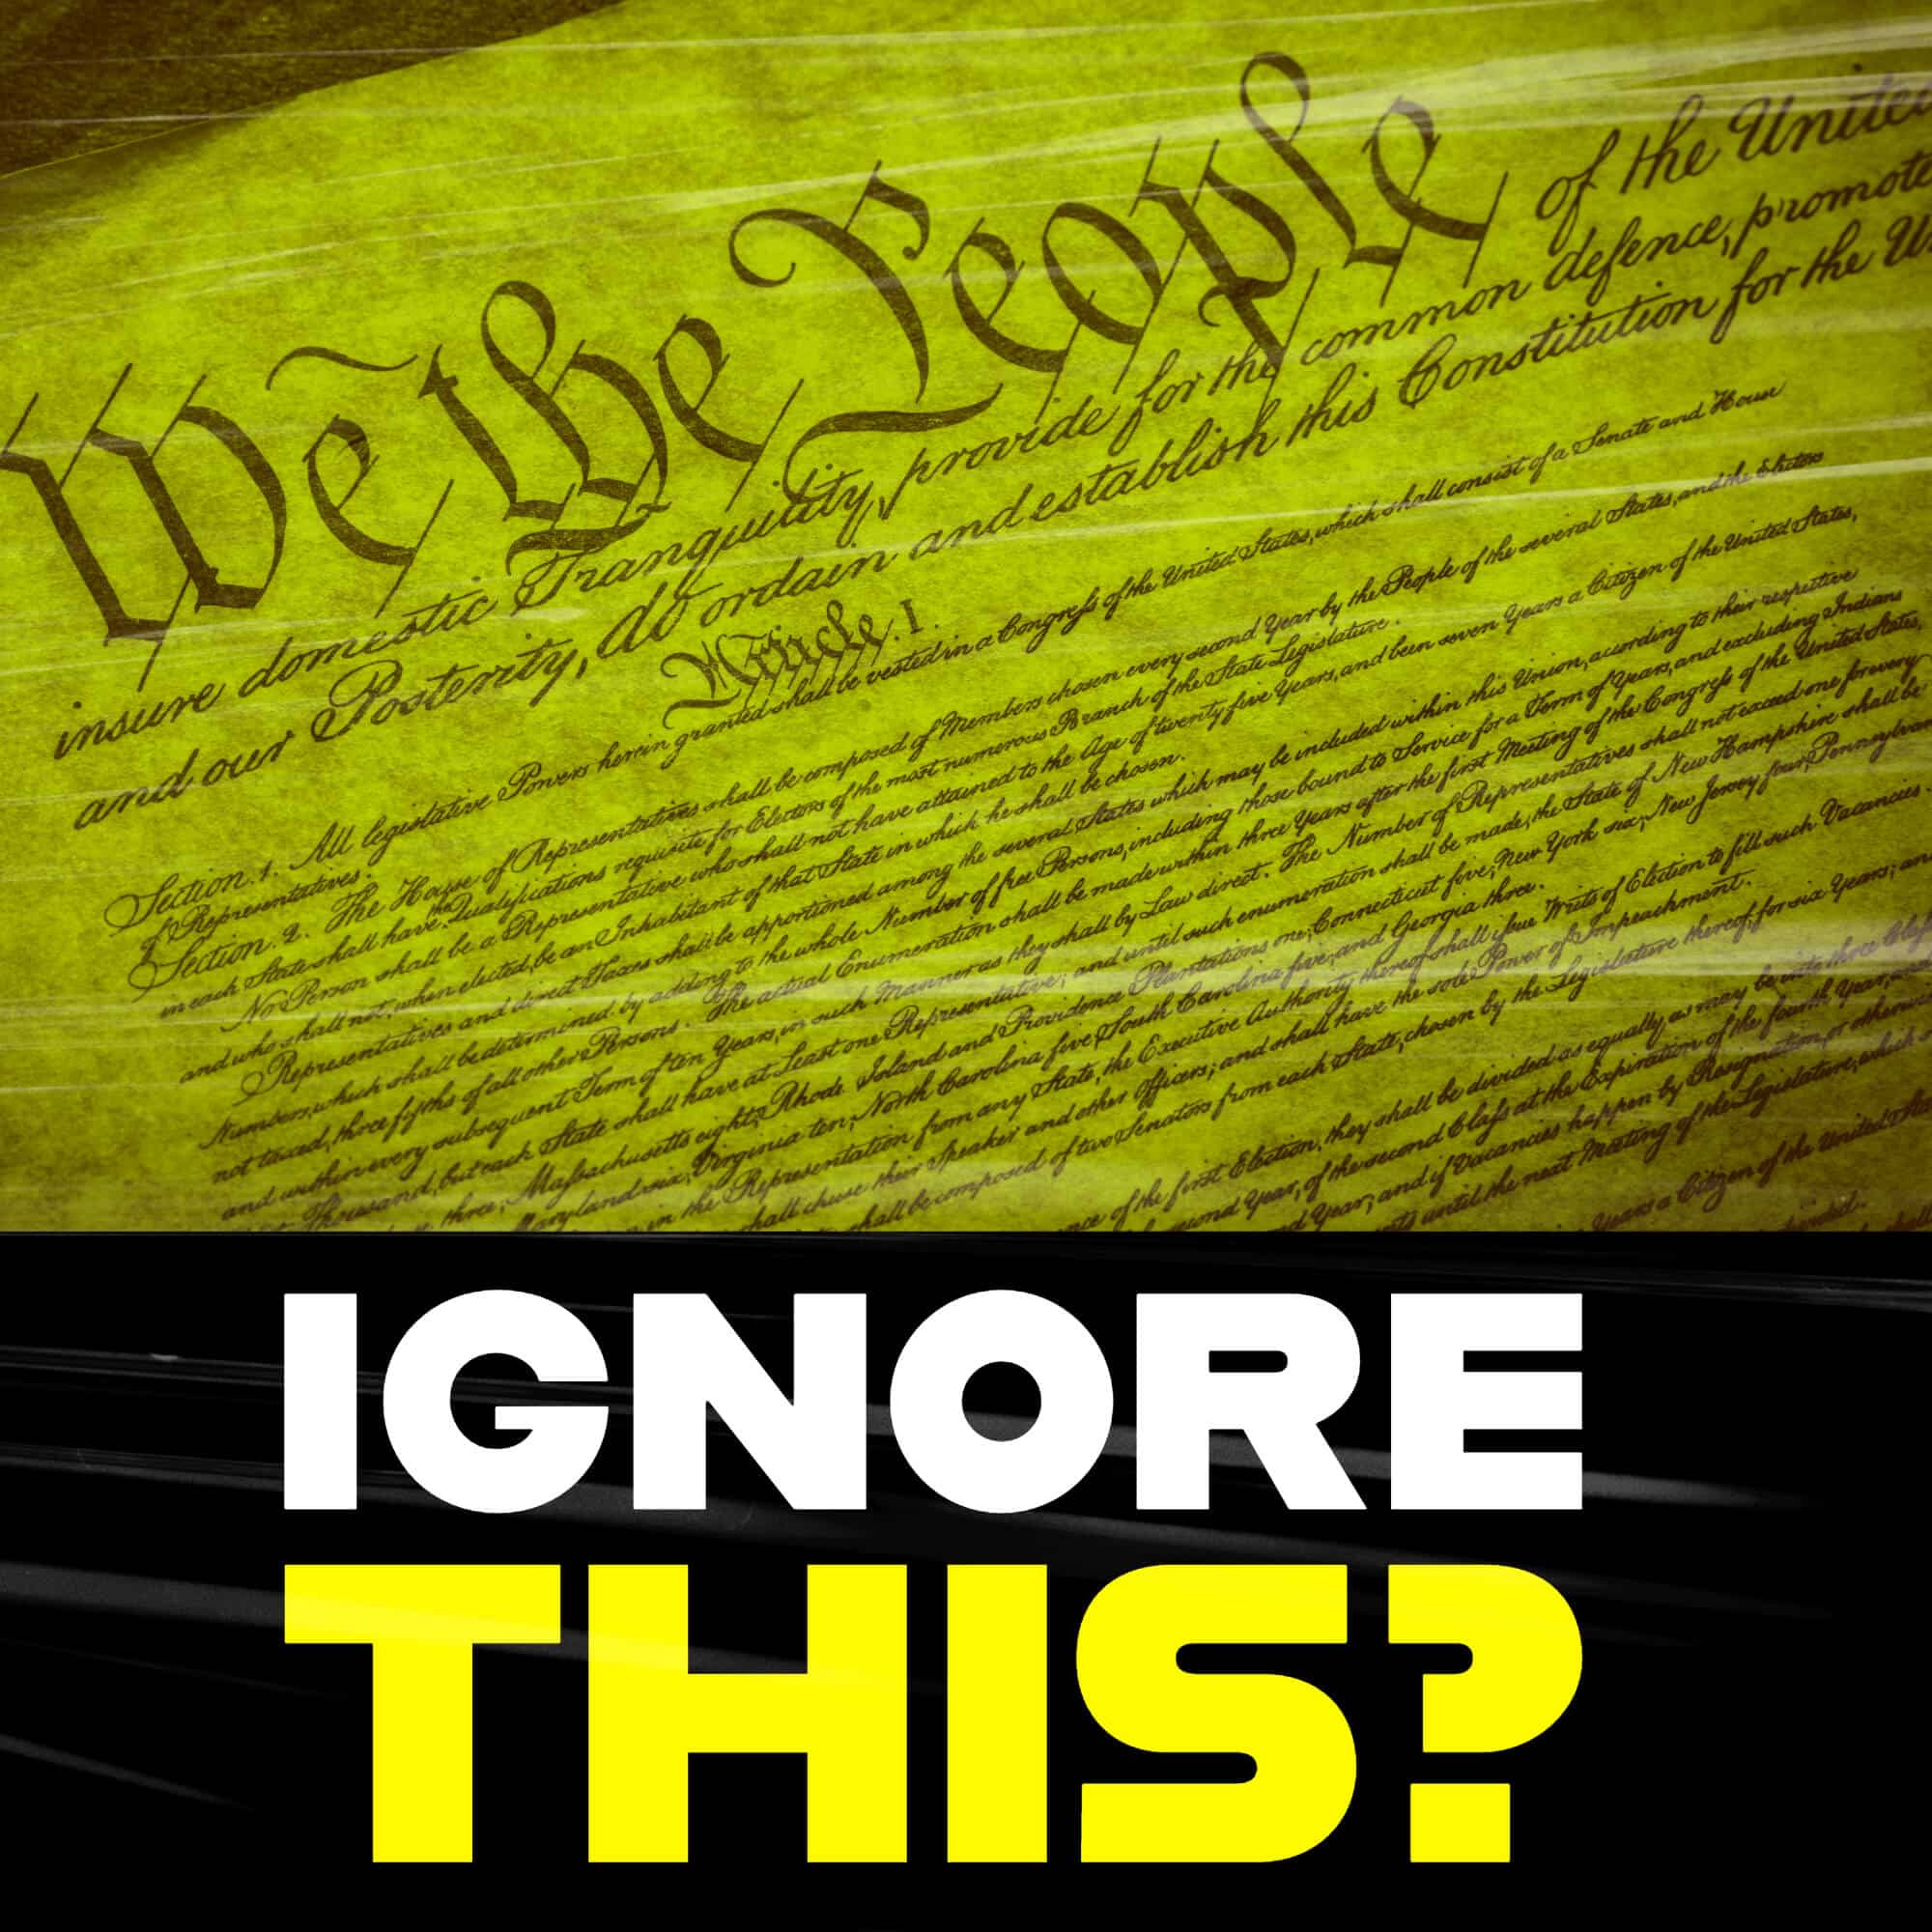 The 10th Amendment They Want You To Ignore